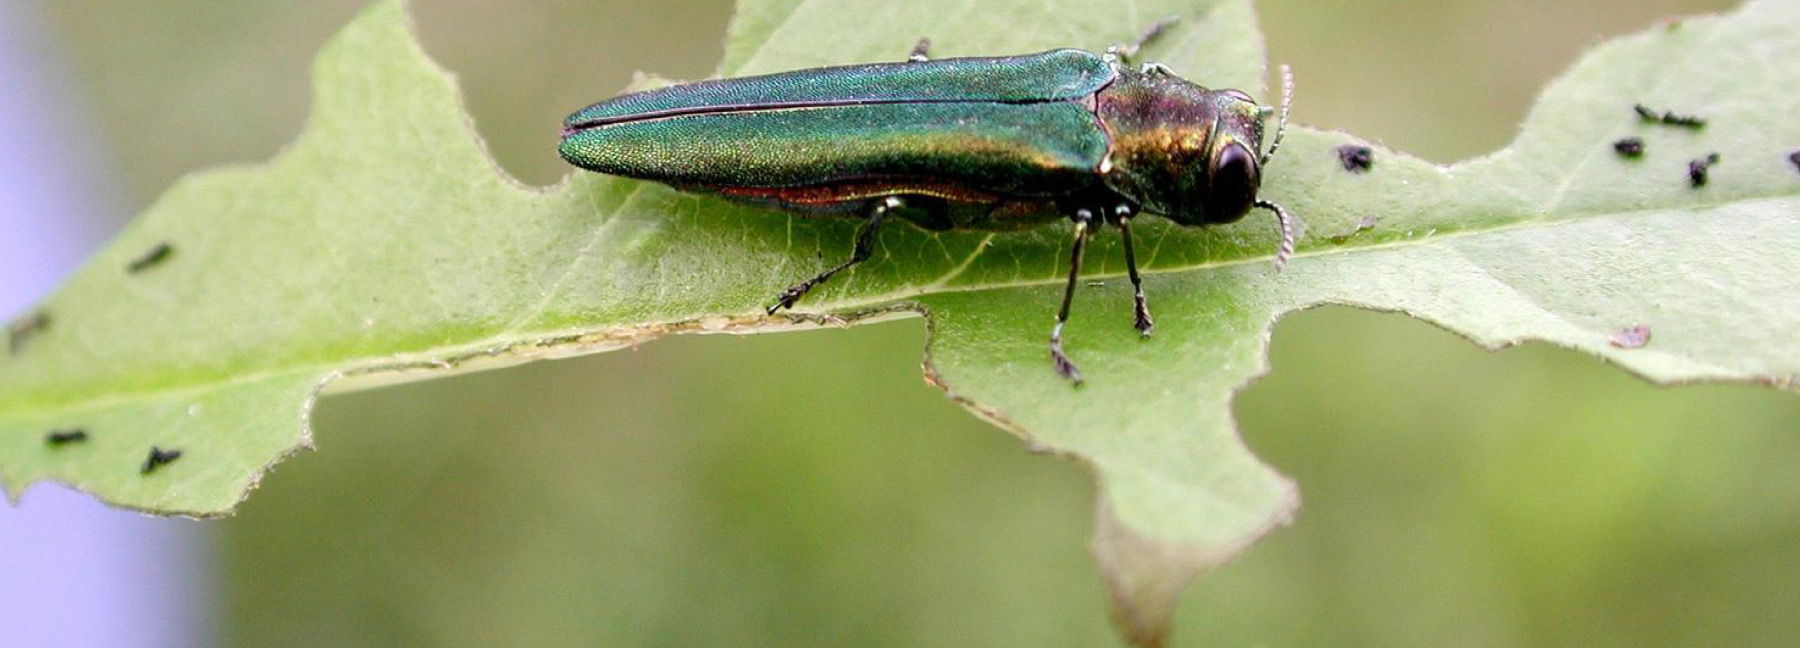 photograph of one emerald ash borer insect on a leaf